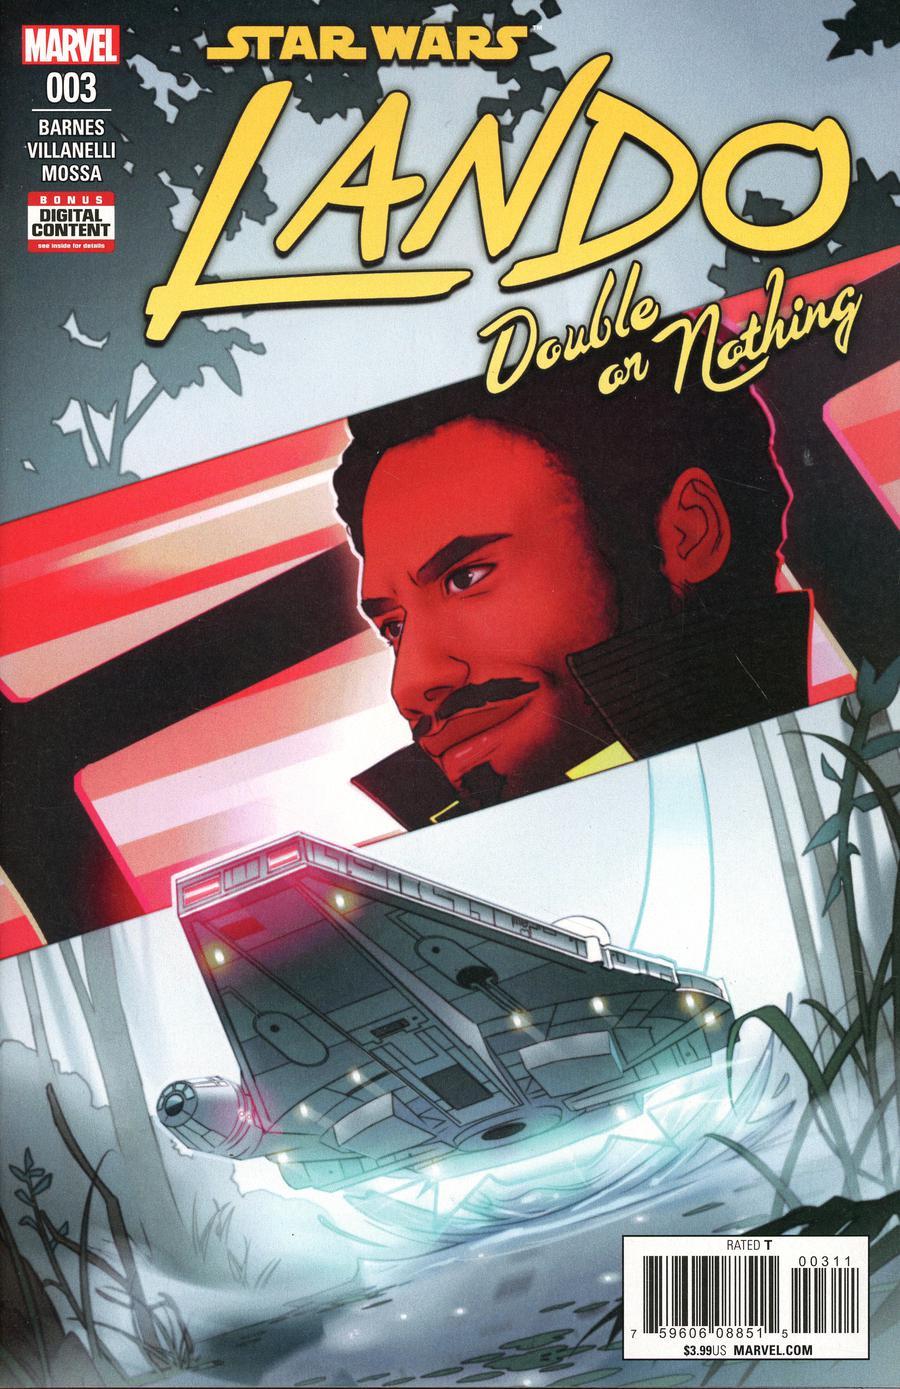 Star Wars Lando Double Or Nothing Vol. 1 #3